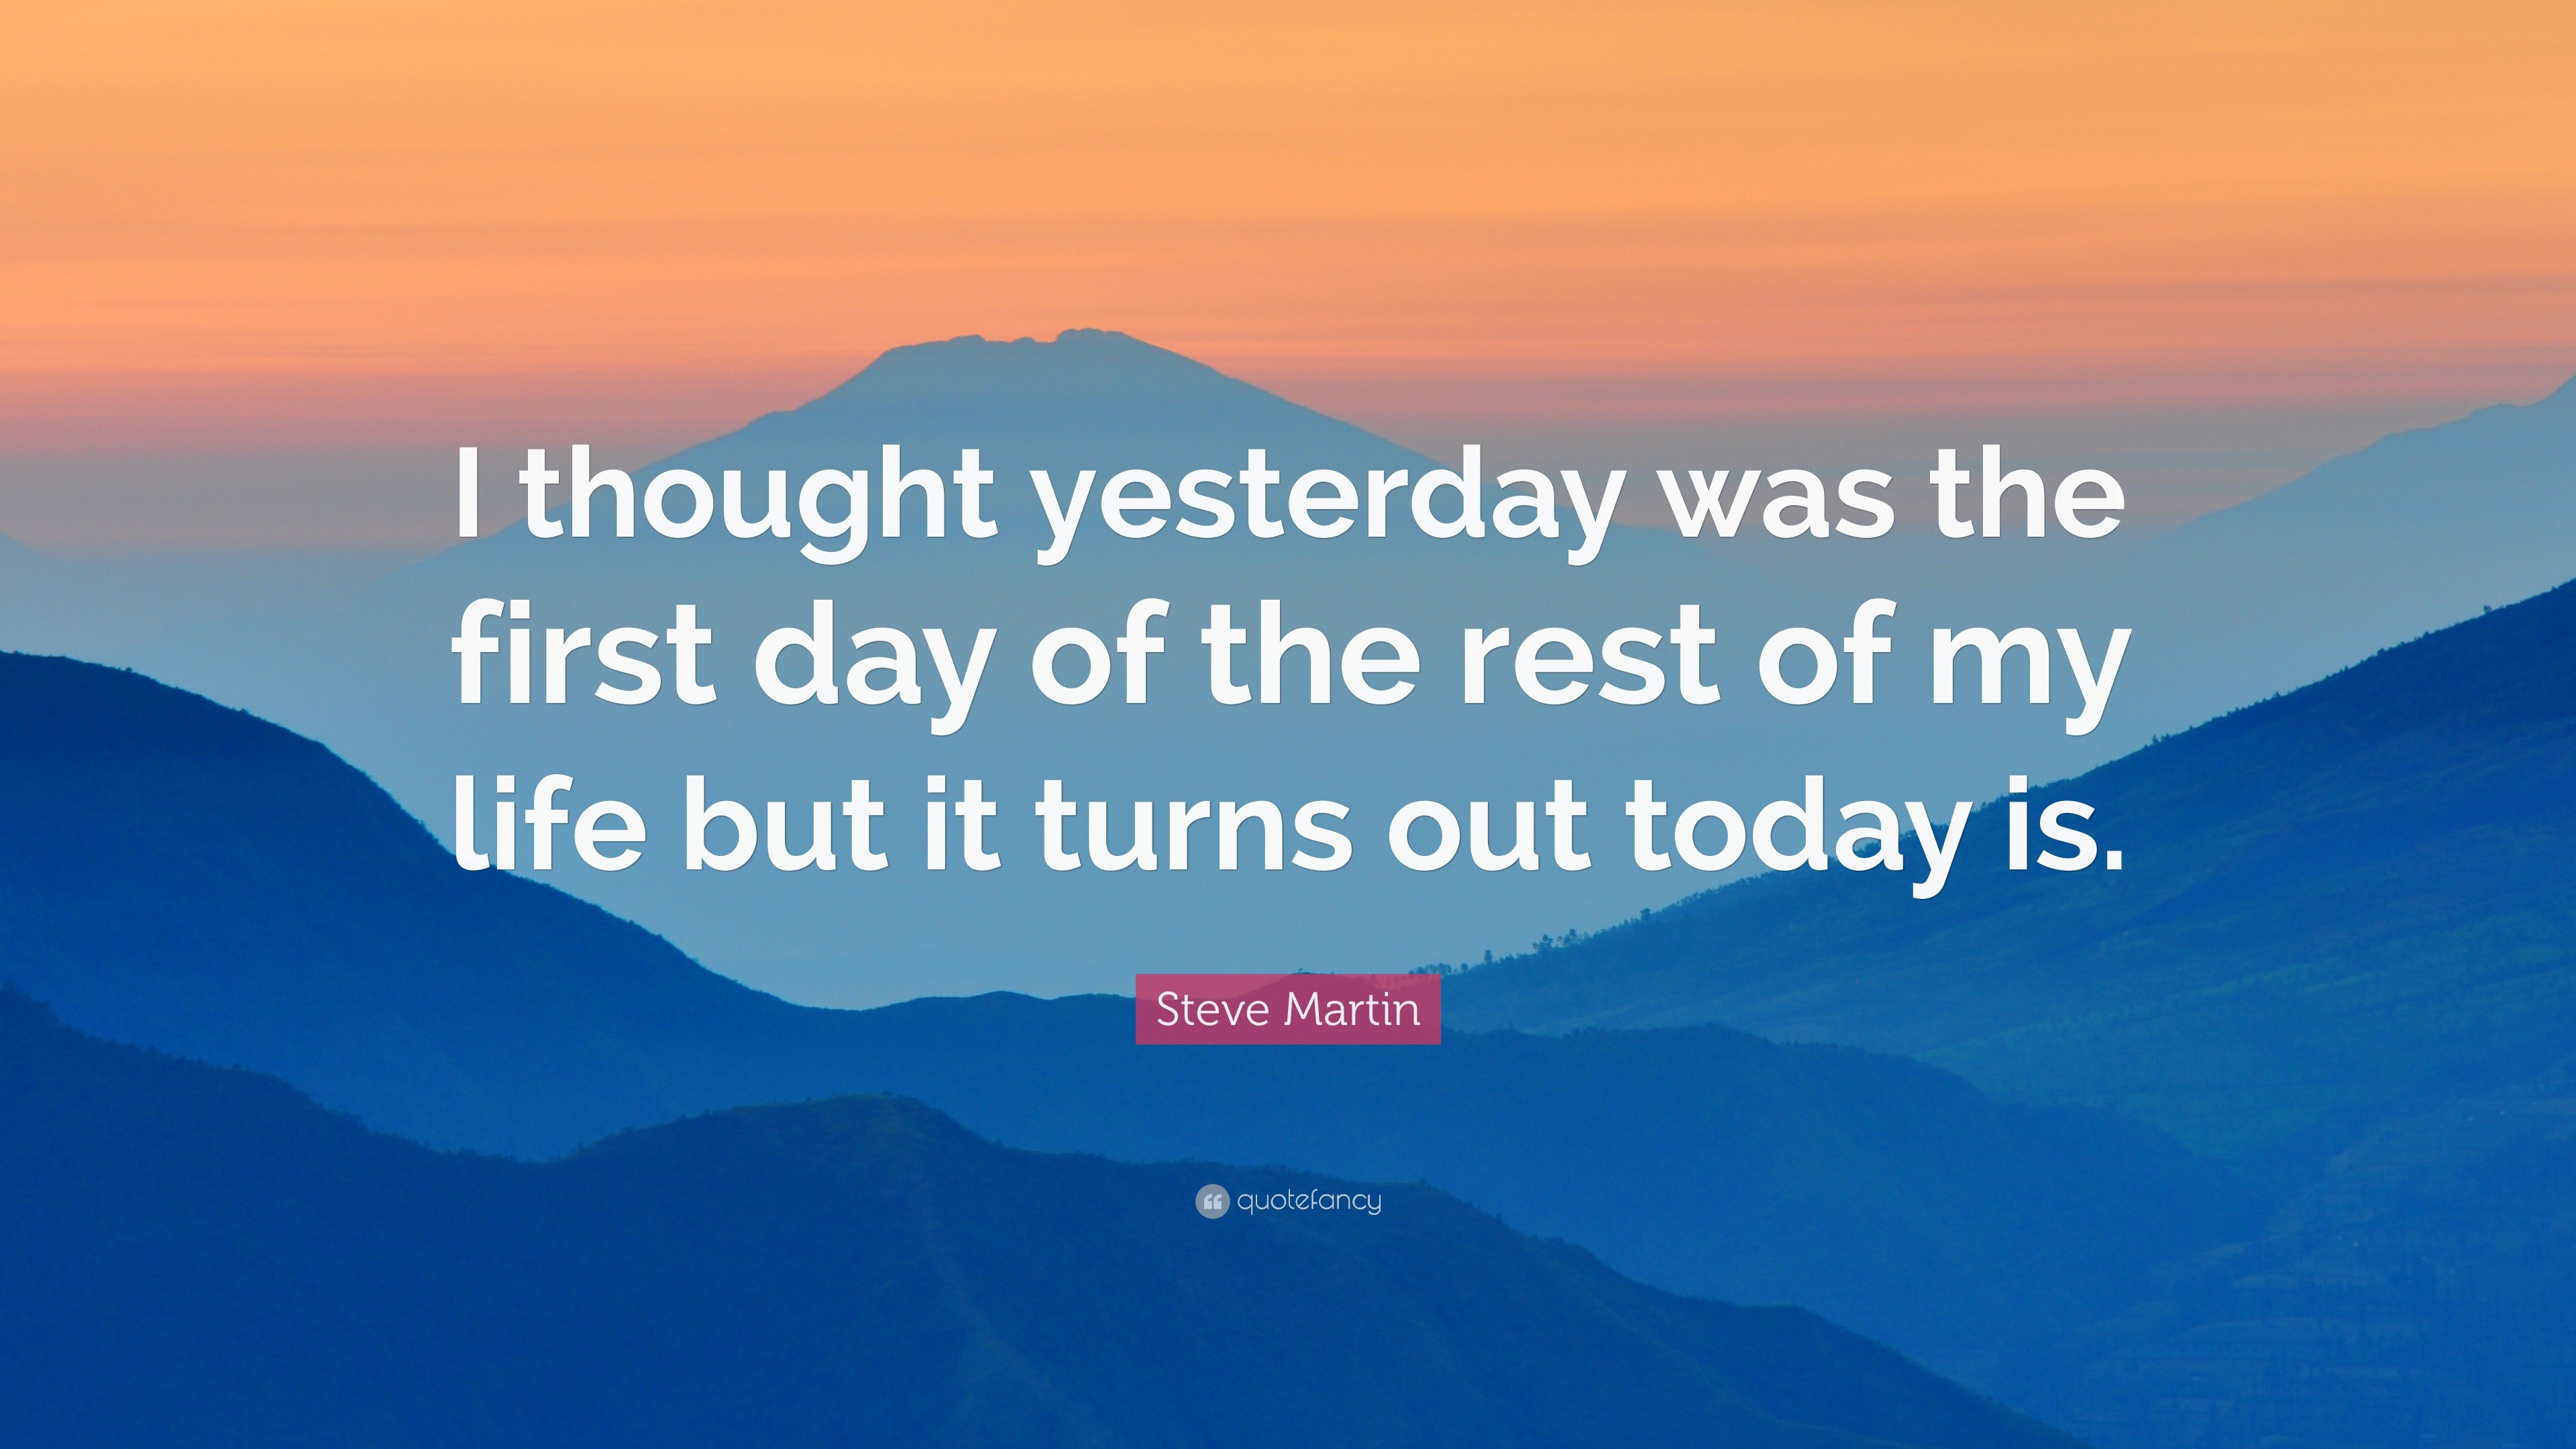 Steve Martin Quote: “I thought yesterday was the first day of the rest ...